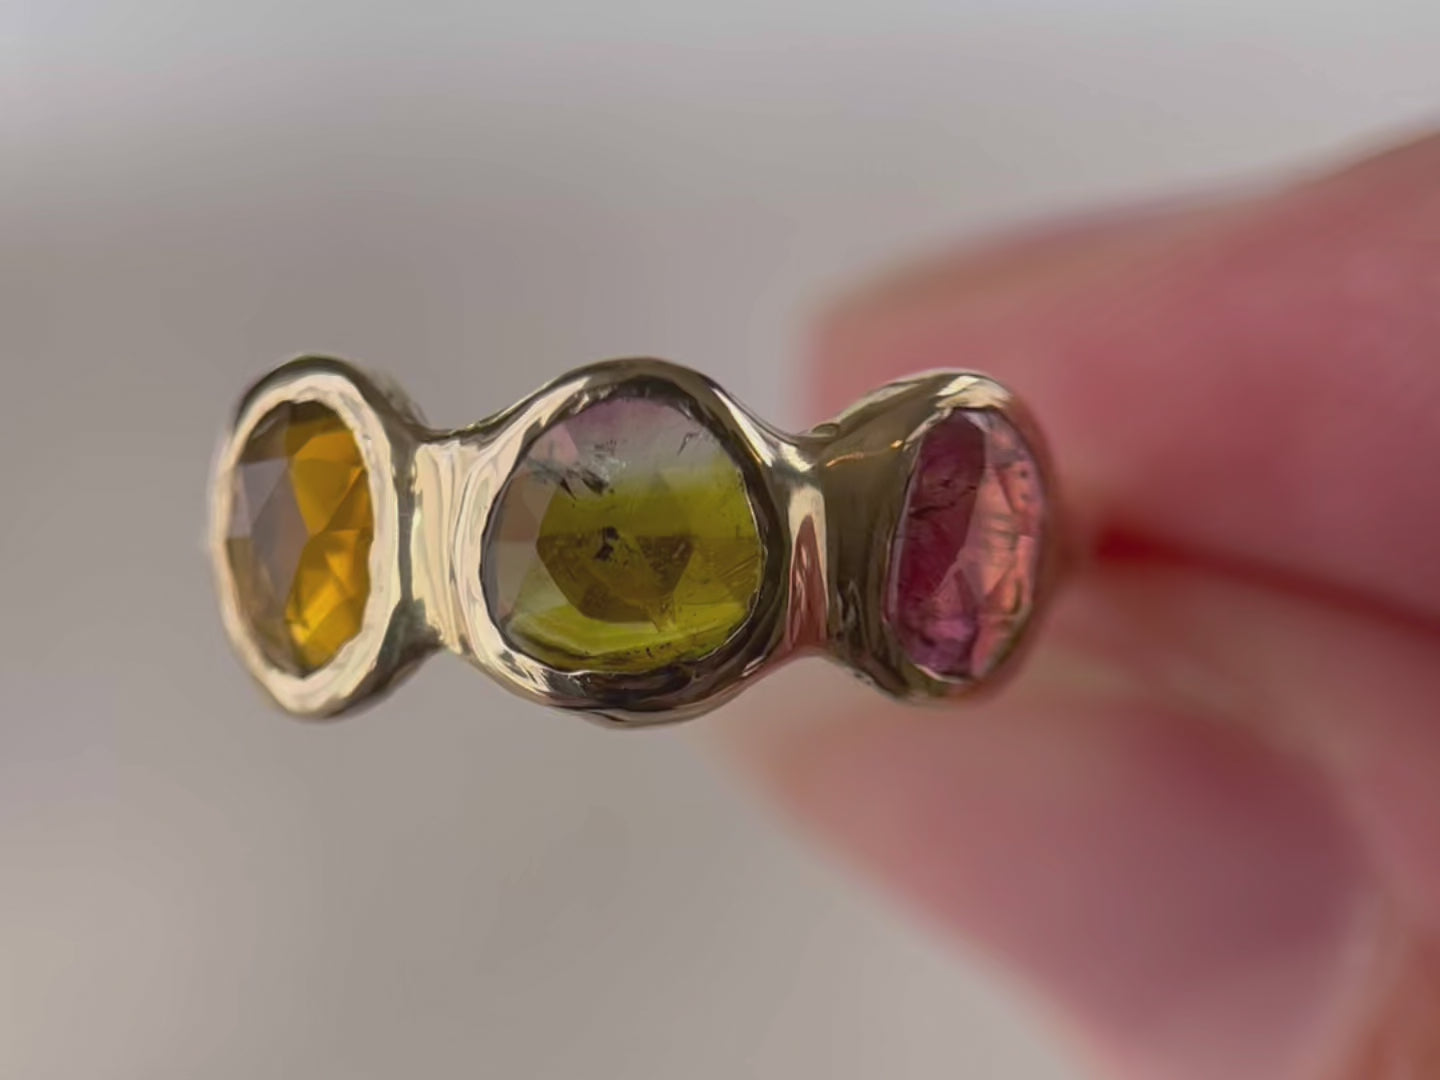 A close up video of watermelon tourmaline gemstones that are bezel set along the front of a 14k gold band.